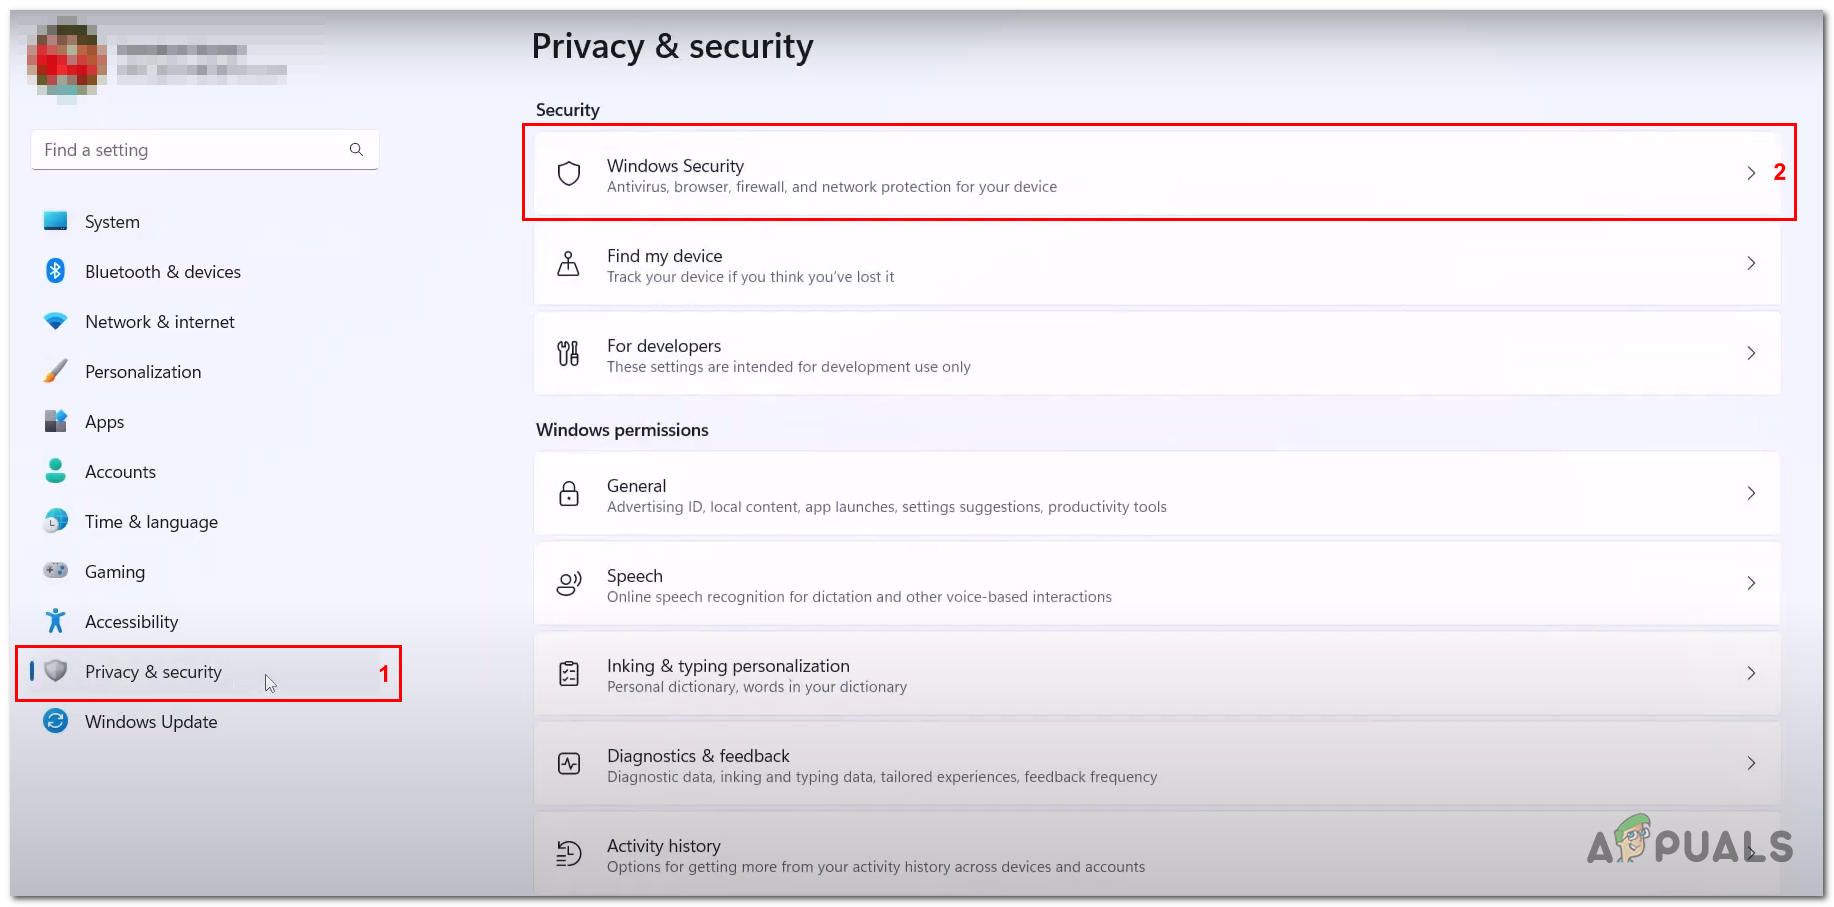 Opening Windows Security inside of the Privacy and security settings